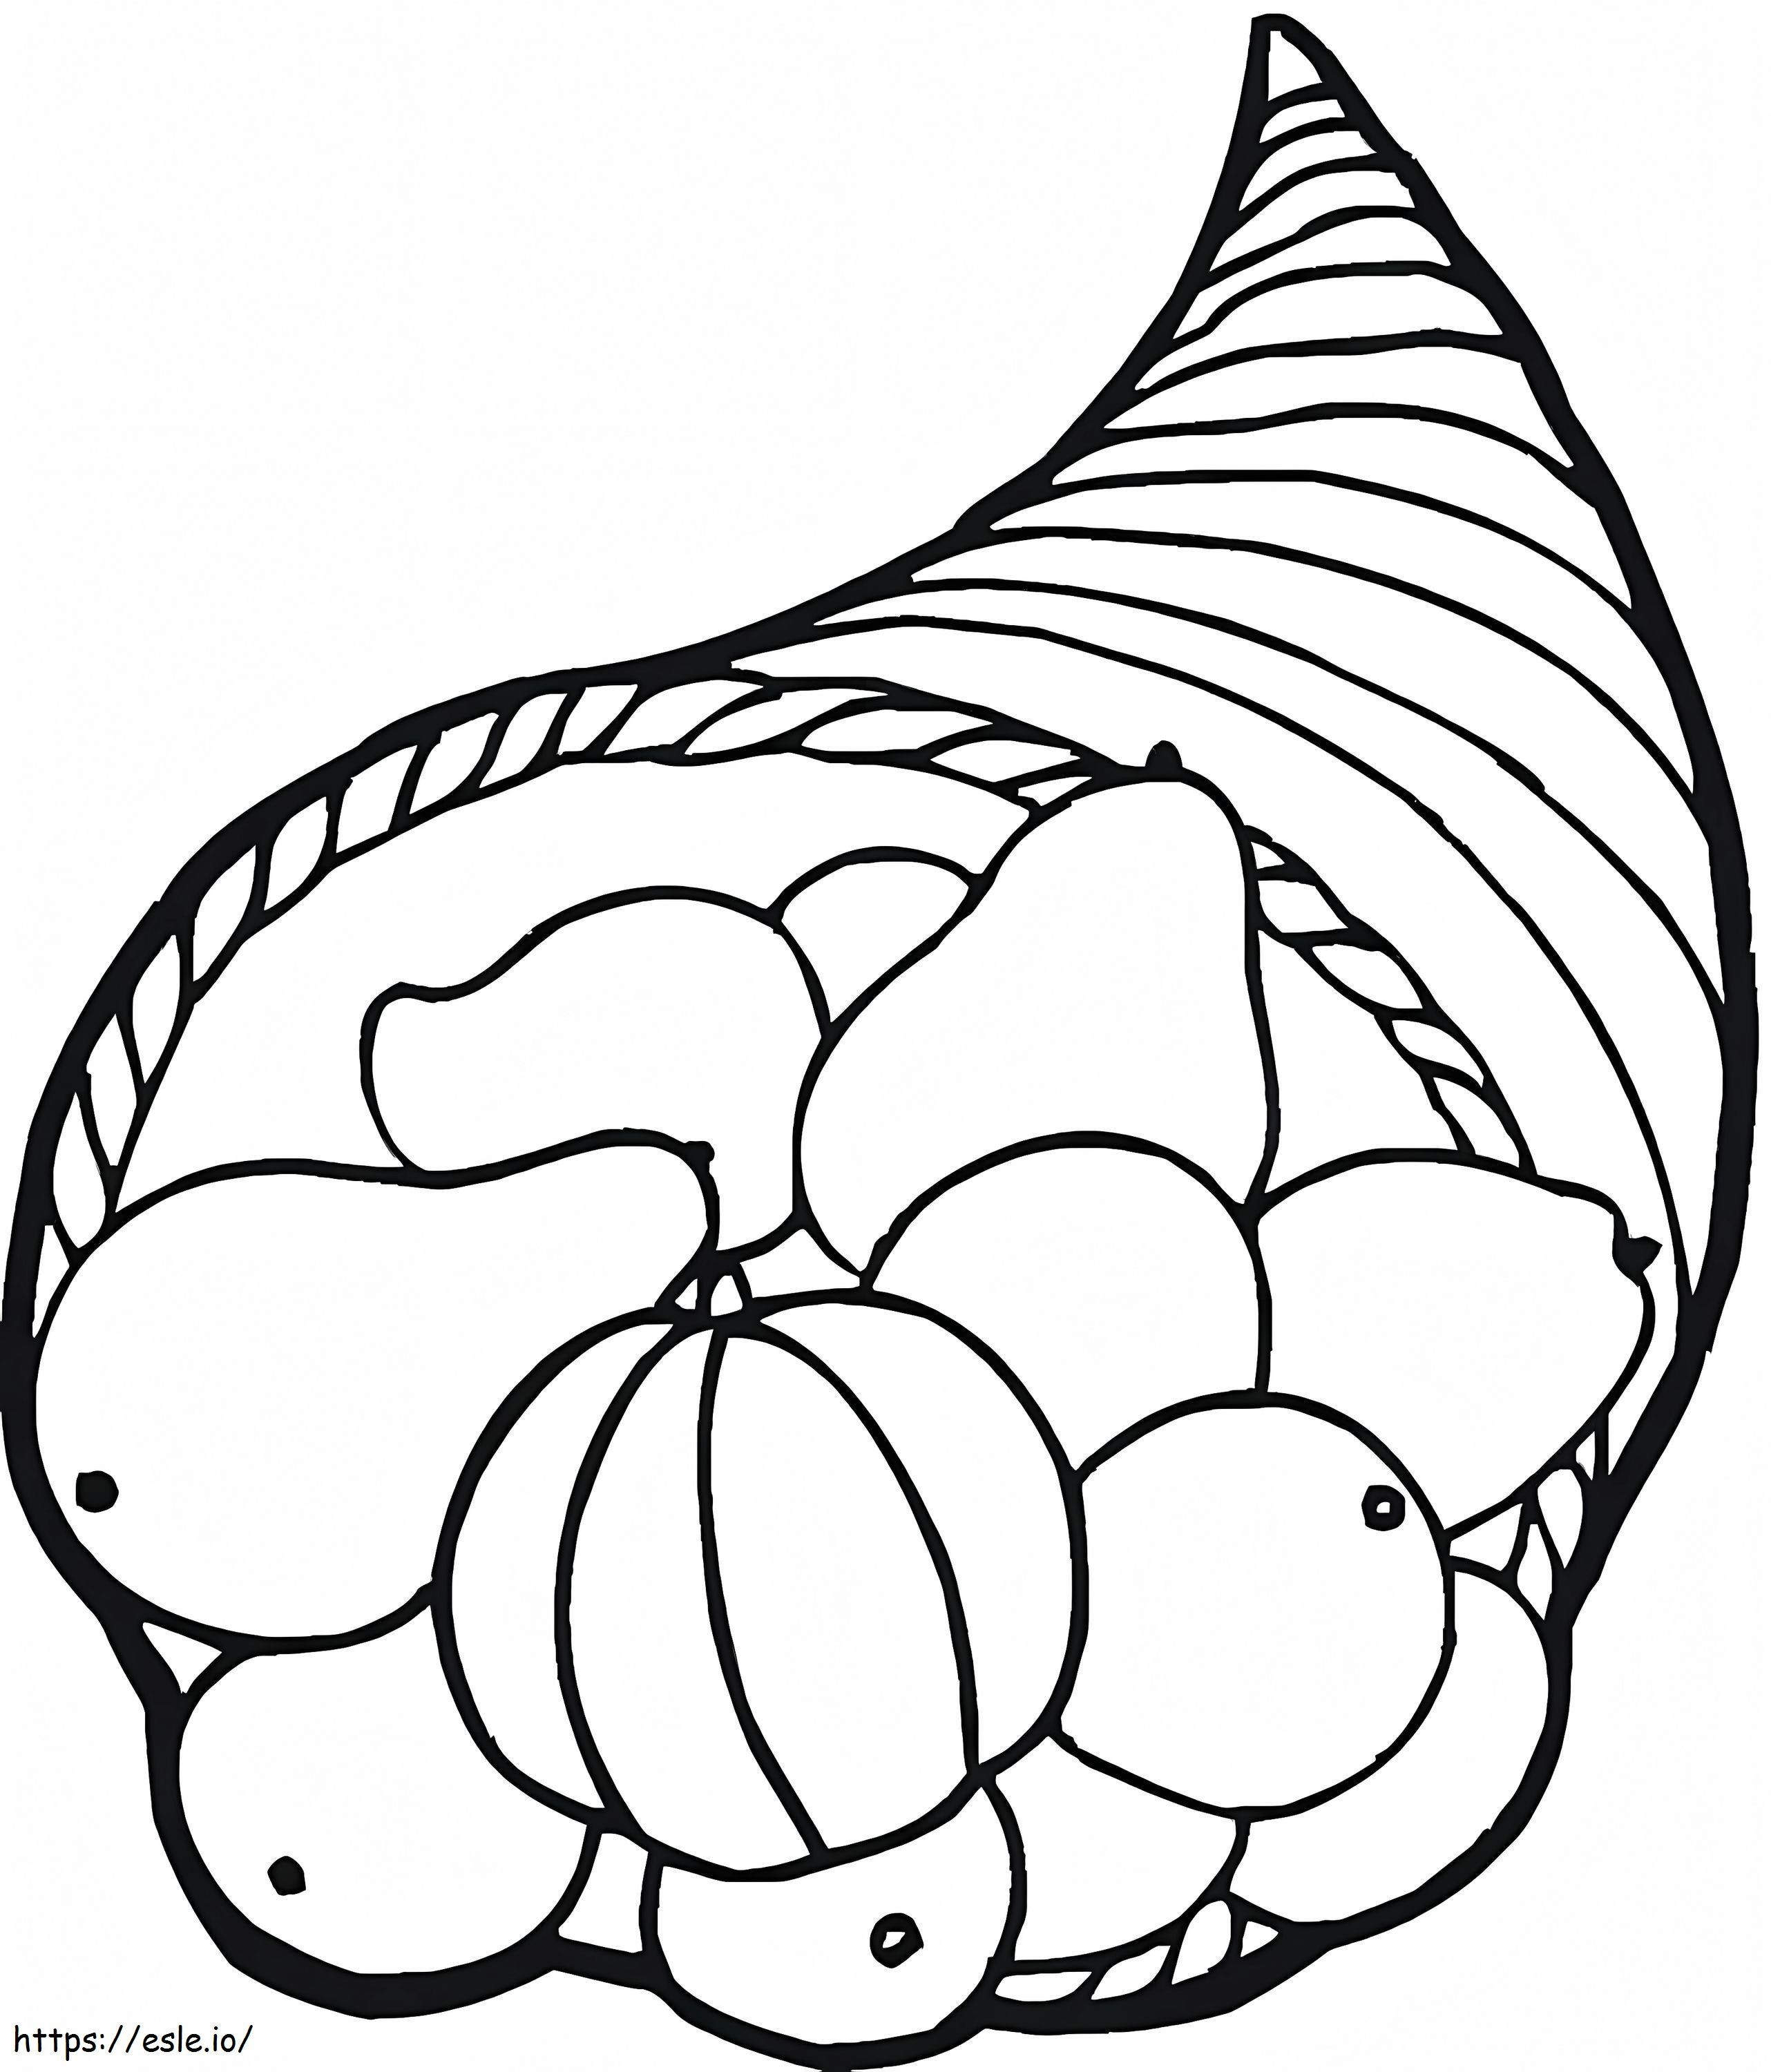 Simple Horn Of Plenty coloring page